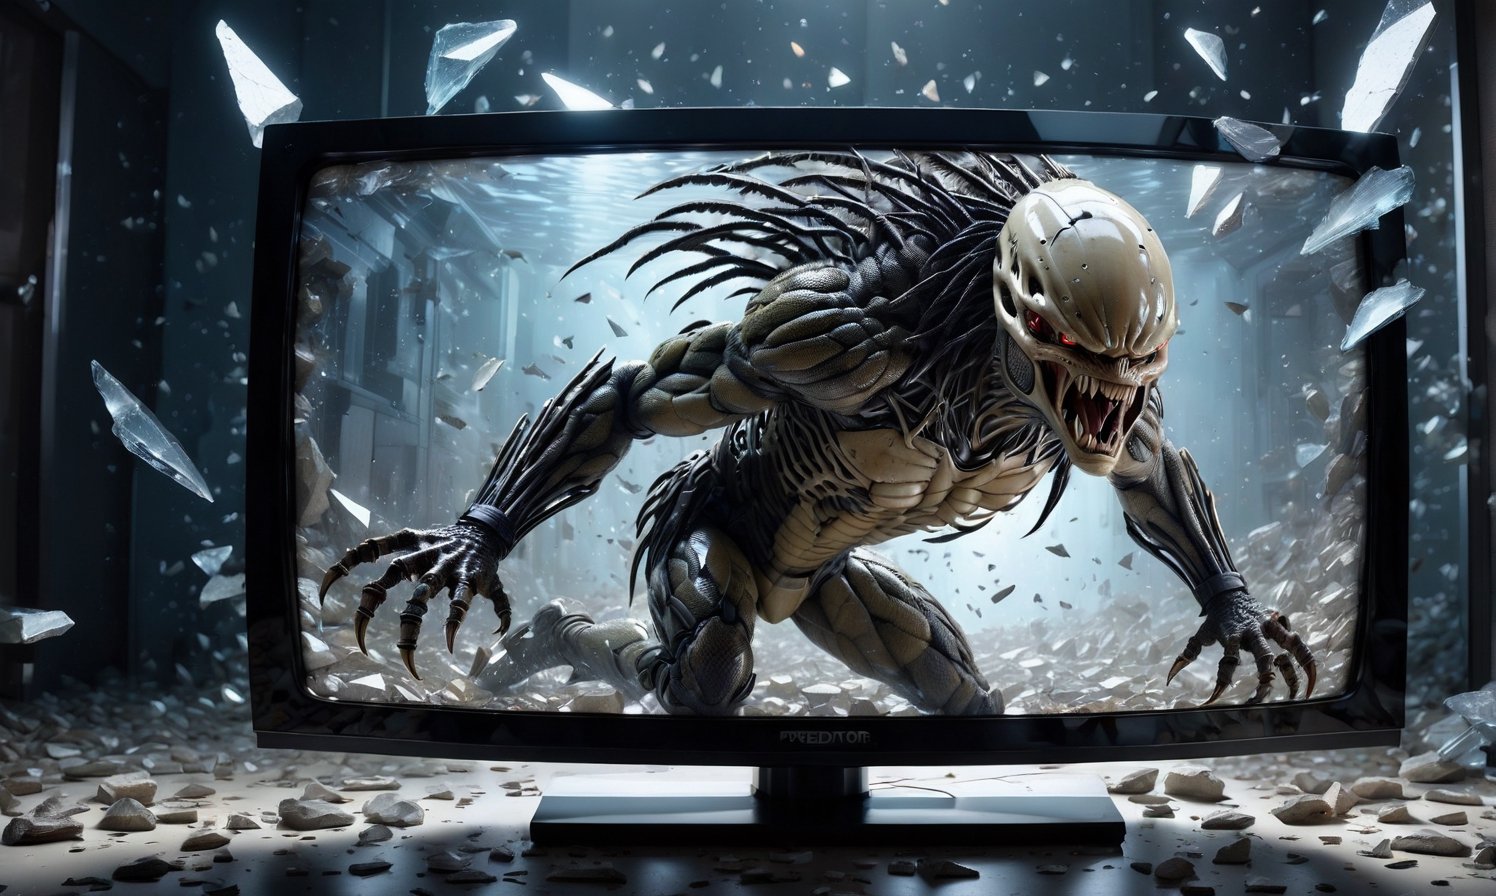 POV you looking at: a double exposure view of a: hyper surreal realistic picture of the Predator trying to escape a TV, ((cracking the screen of the TV)), (glass shards fly everywhere:1.2)
,skpleonardostyle